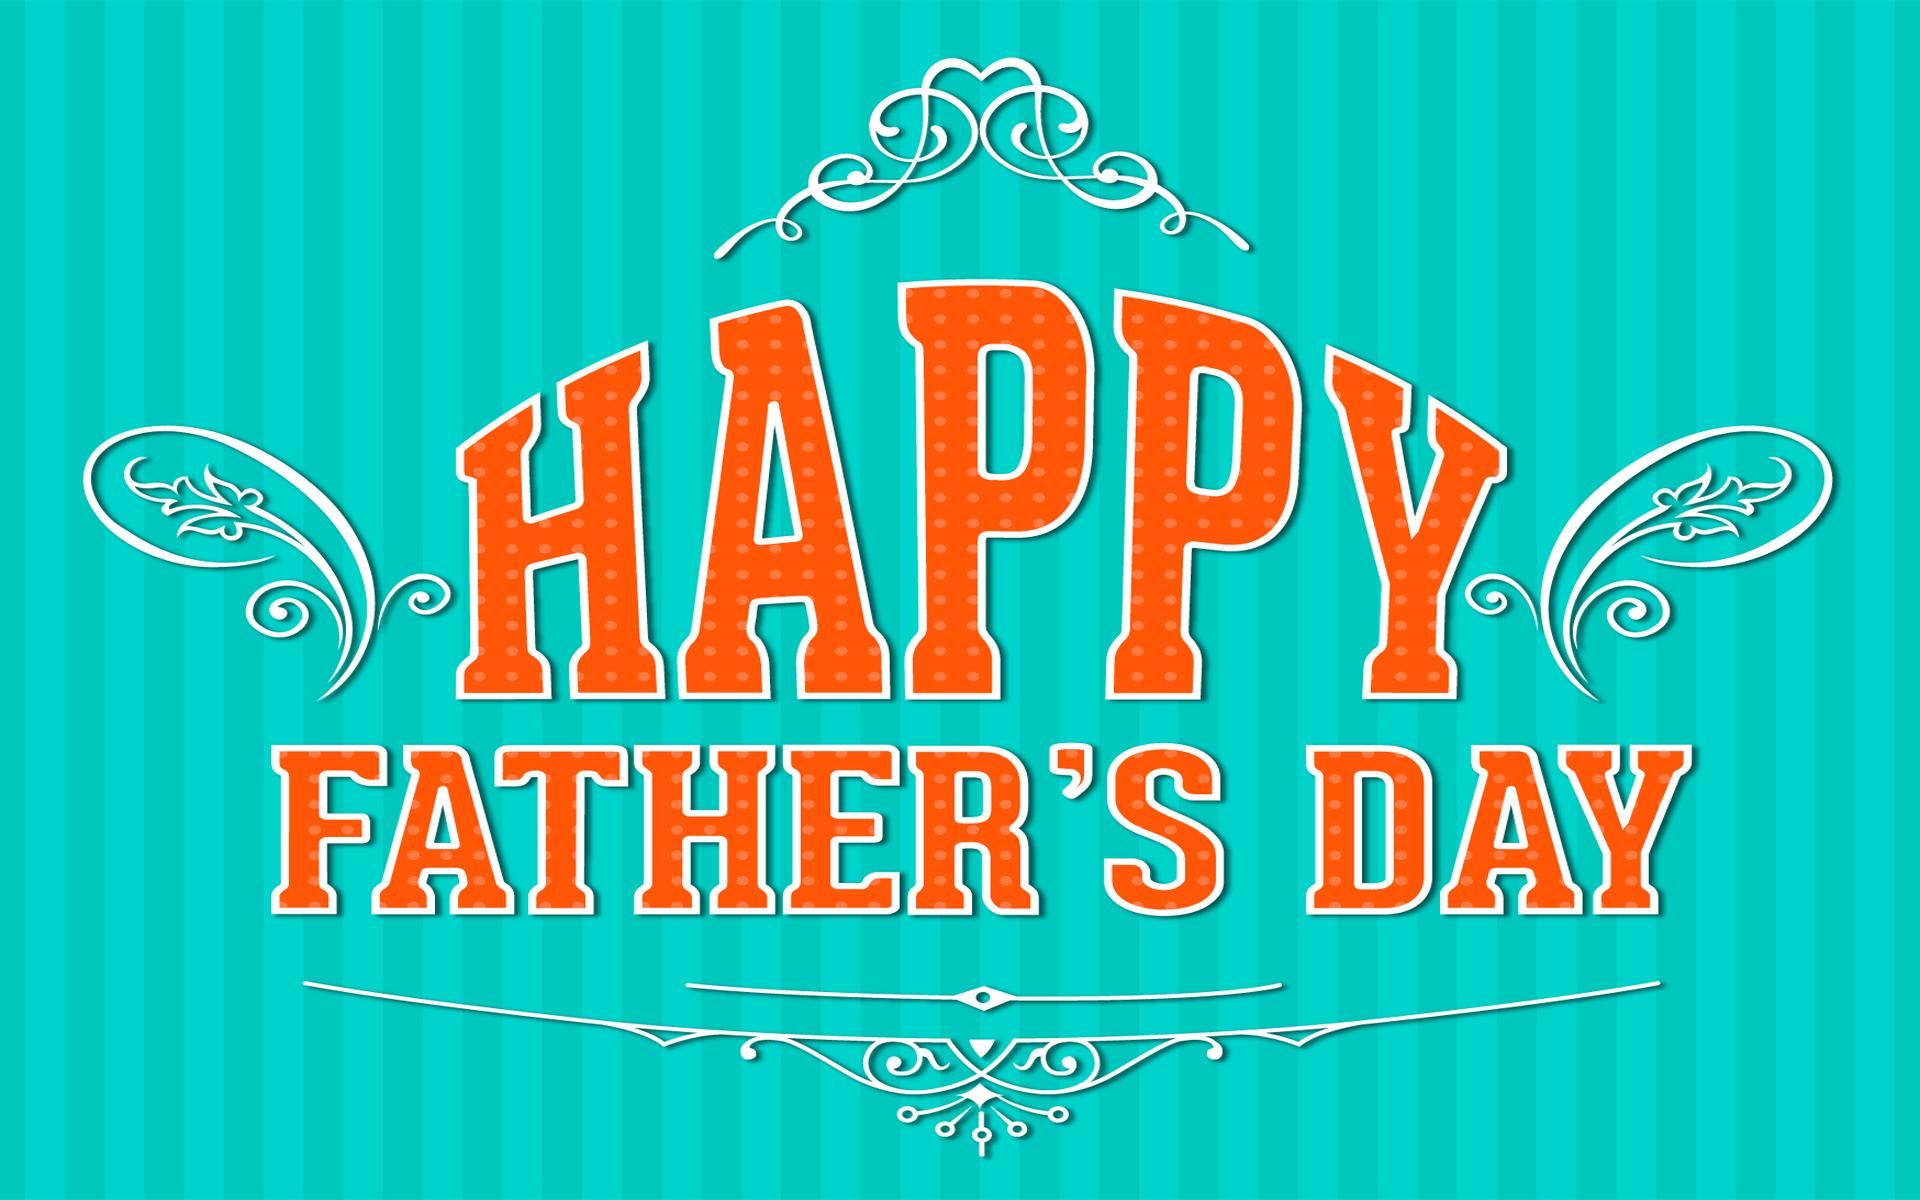 Happy-Father-Day-Best-Wishes-Greetings-3427810999.jpg